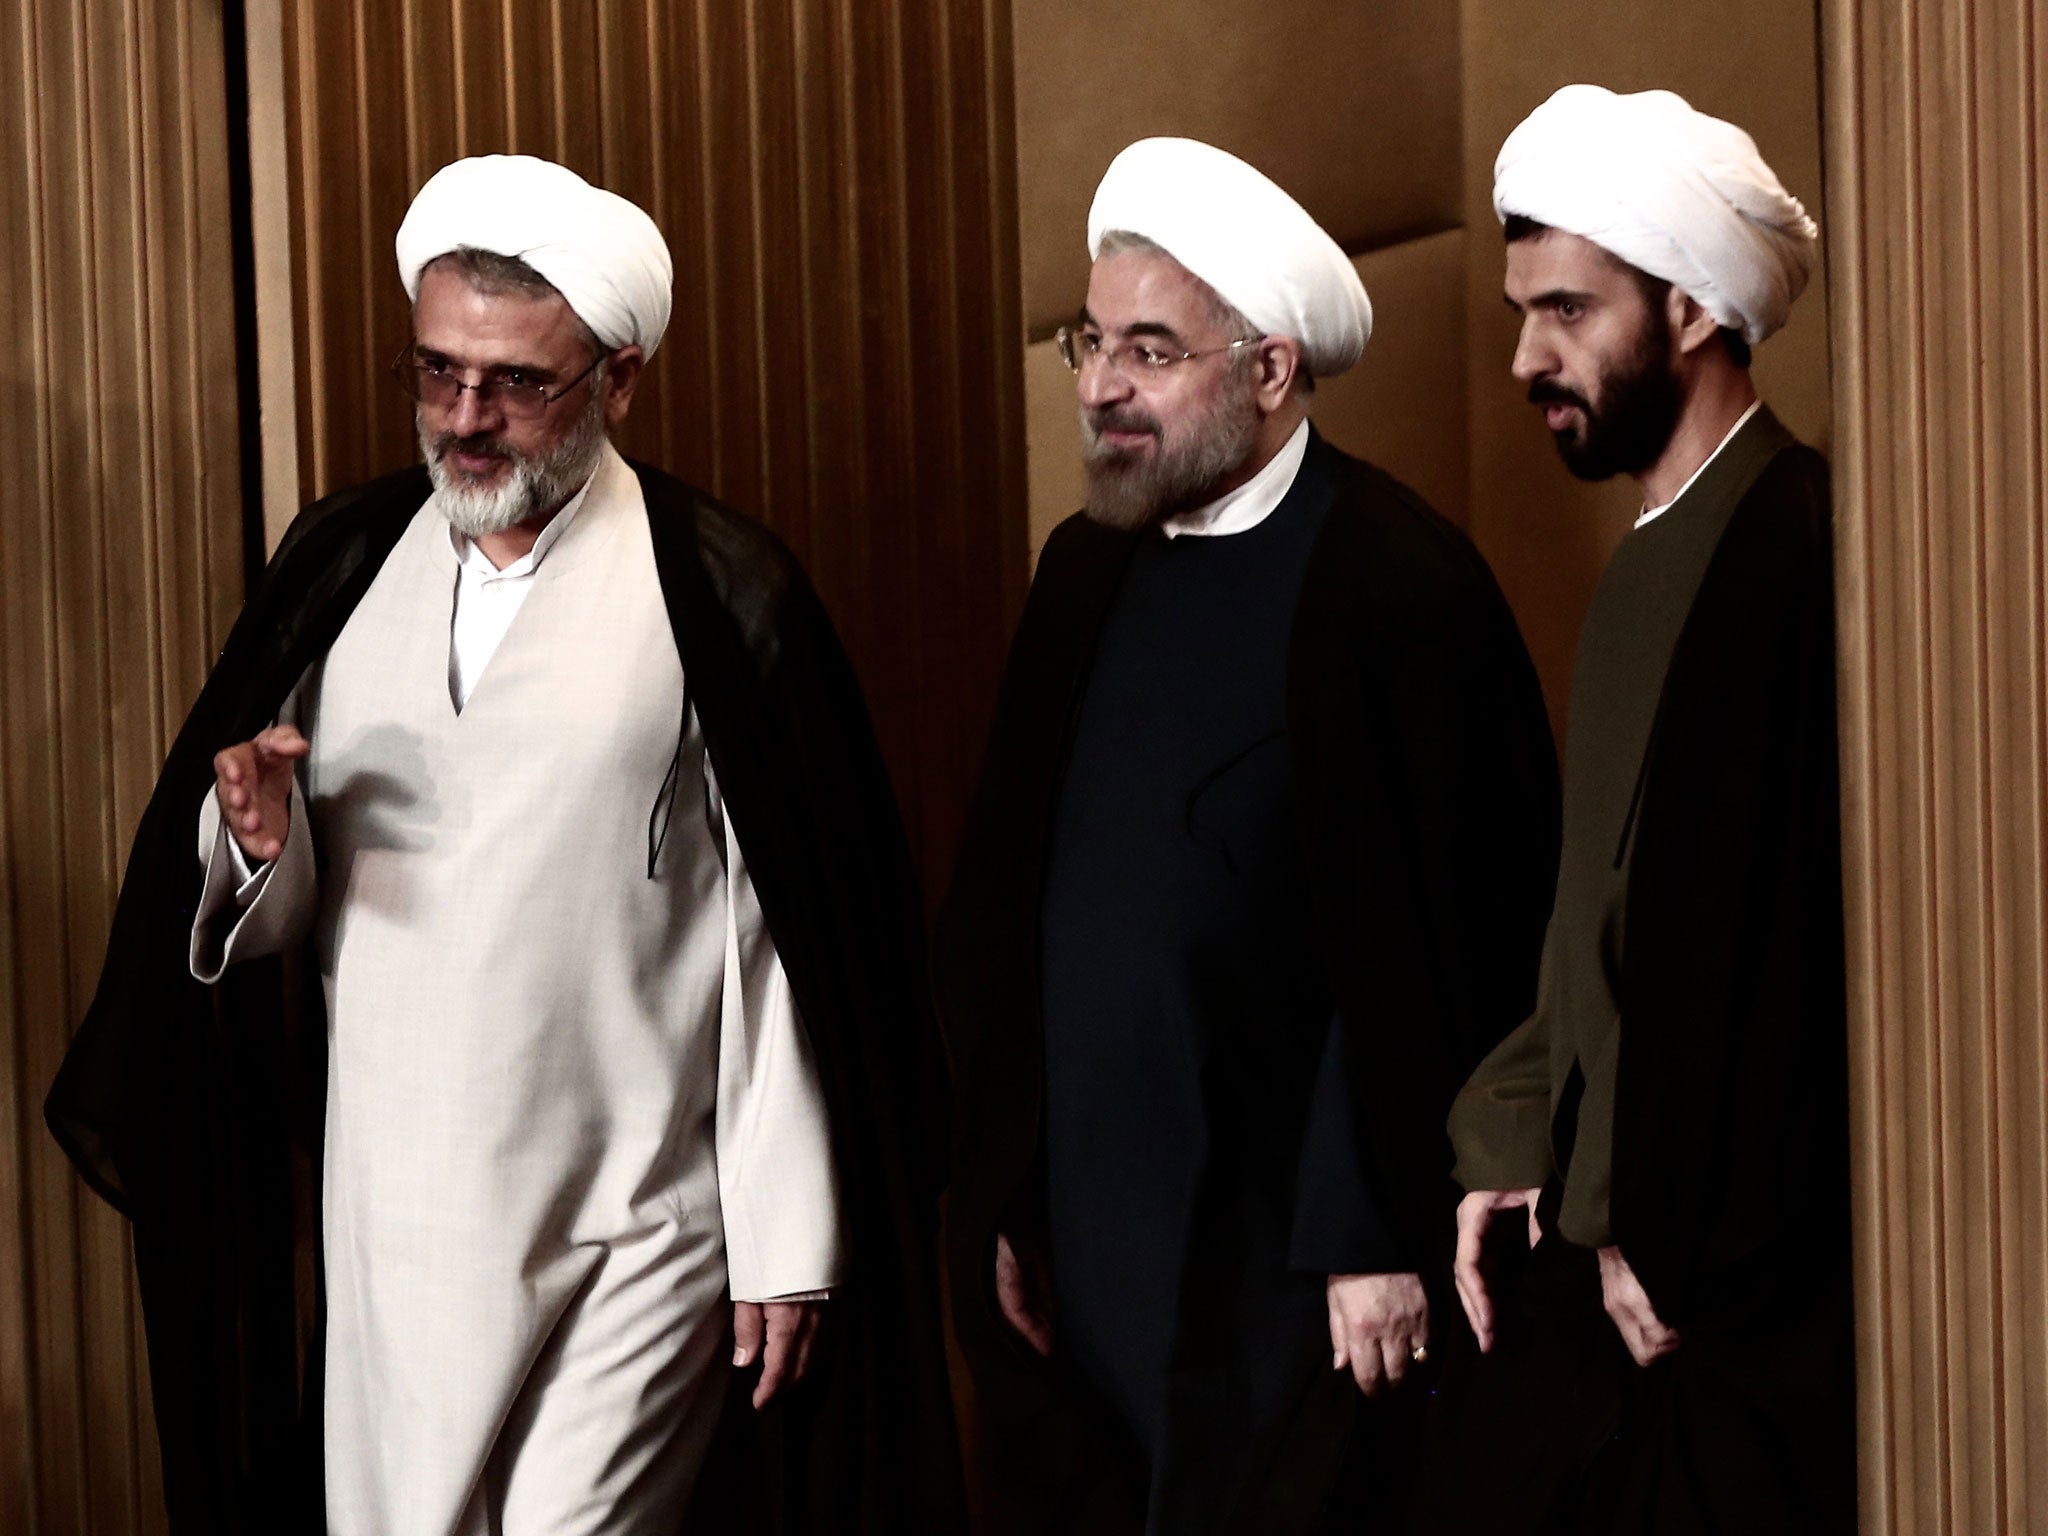 Iranian President Hassan Rouhani (C) attends a session of the Assembly of Experts in Tehran on September 3, 2013.